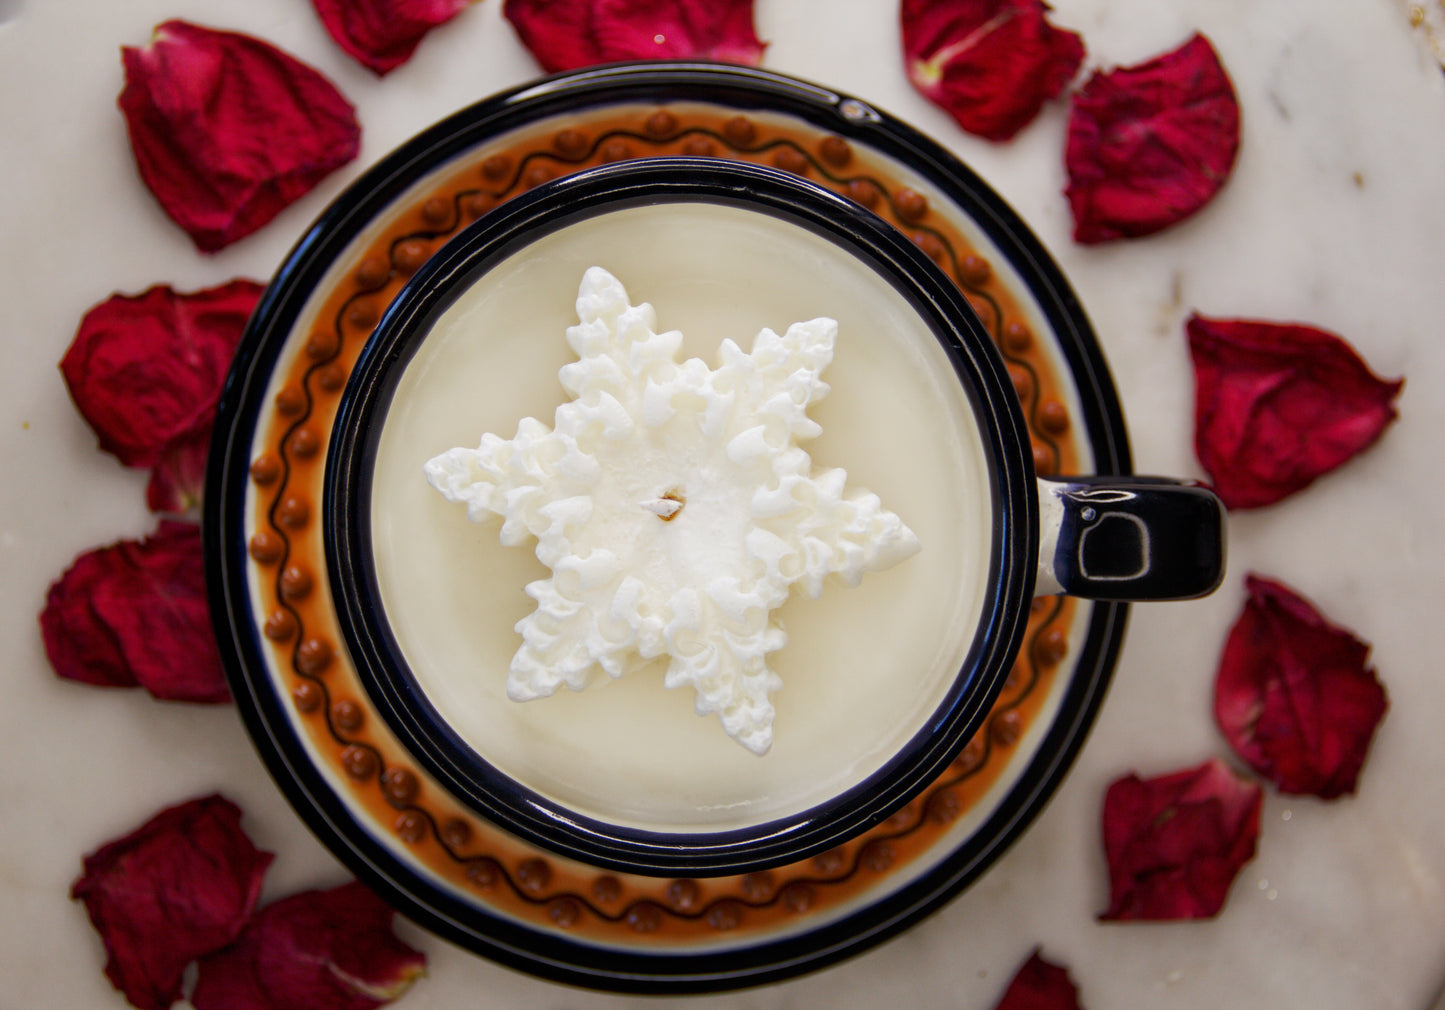 Artisanal candle with an elegant star shaped soy wax candle on the top in a beautiful multicolored talavera cup and plate. Handcrafted by Artisan in Puebla, Mexico. 100% All Natural Soy Candle. Reuse the talavera as home decor or storage.